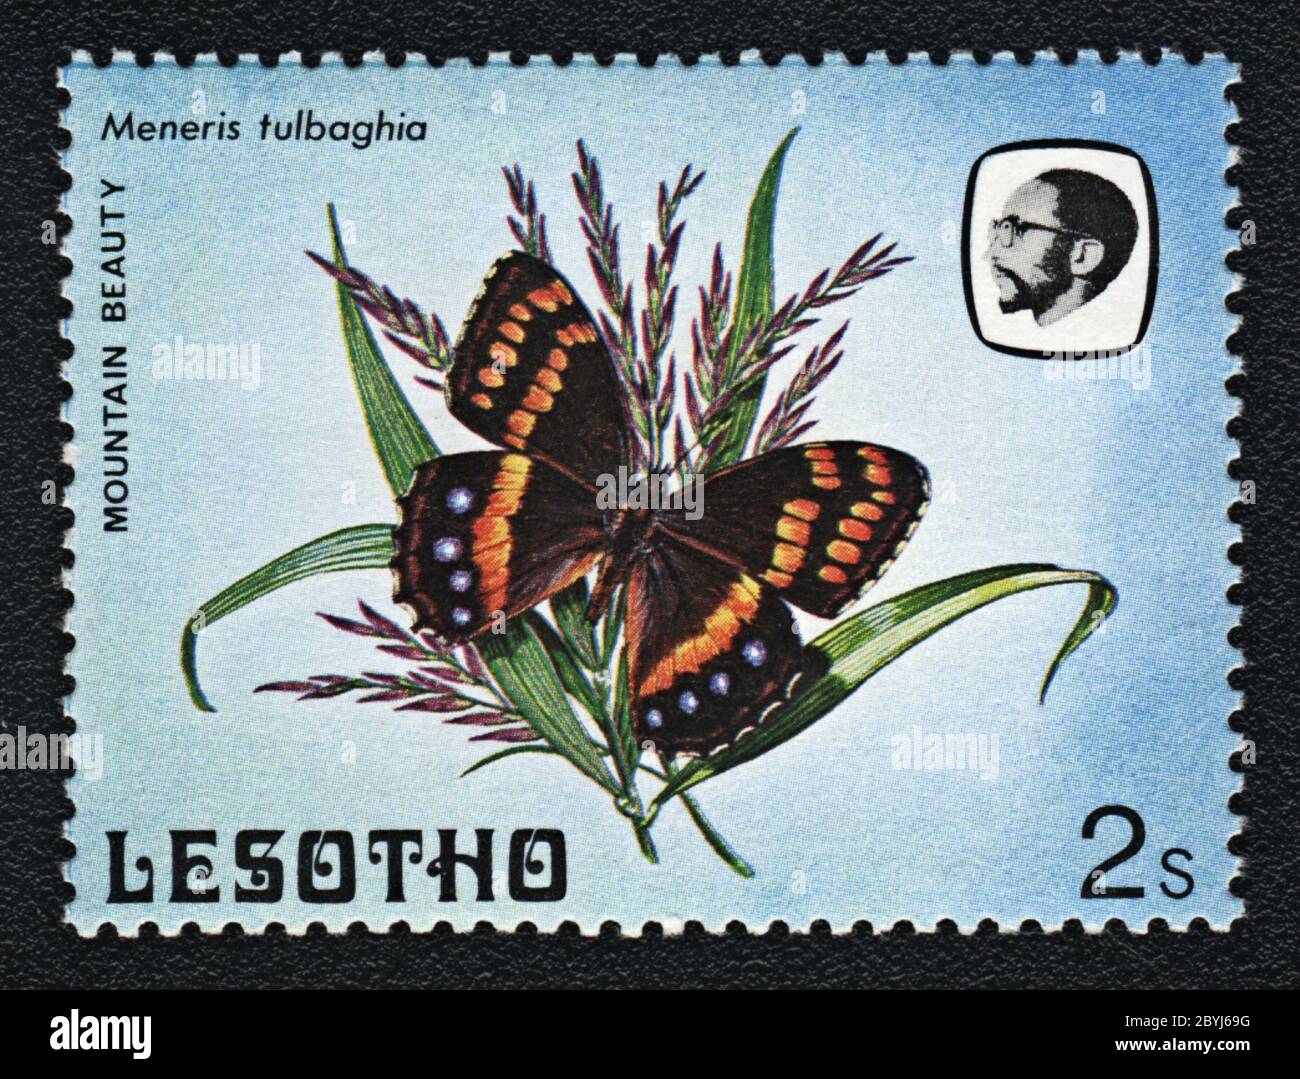 Mountain beauty, Meneris tulbaghia. Postage stamp  Series Butterflies,  Lesotho,1984 Stock Photo